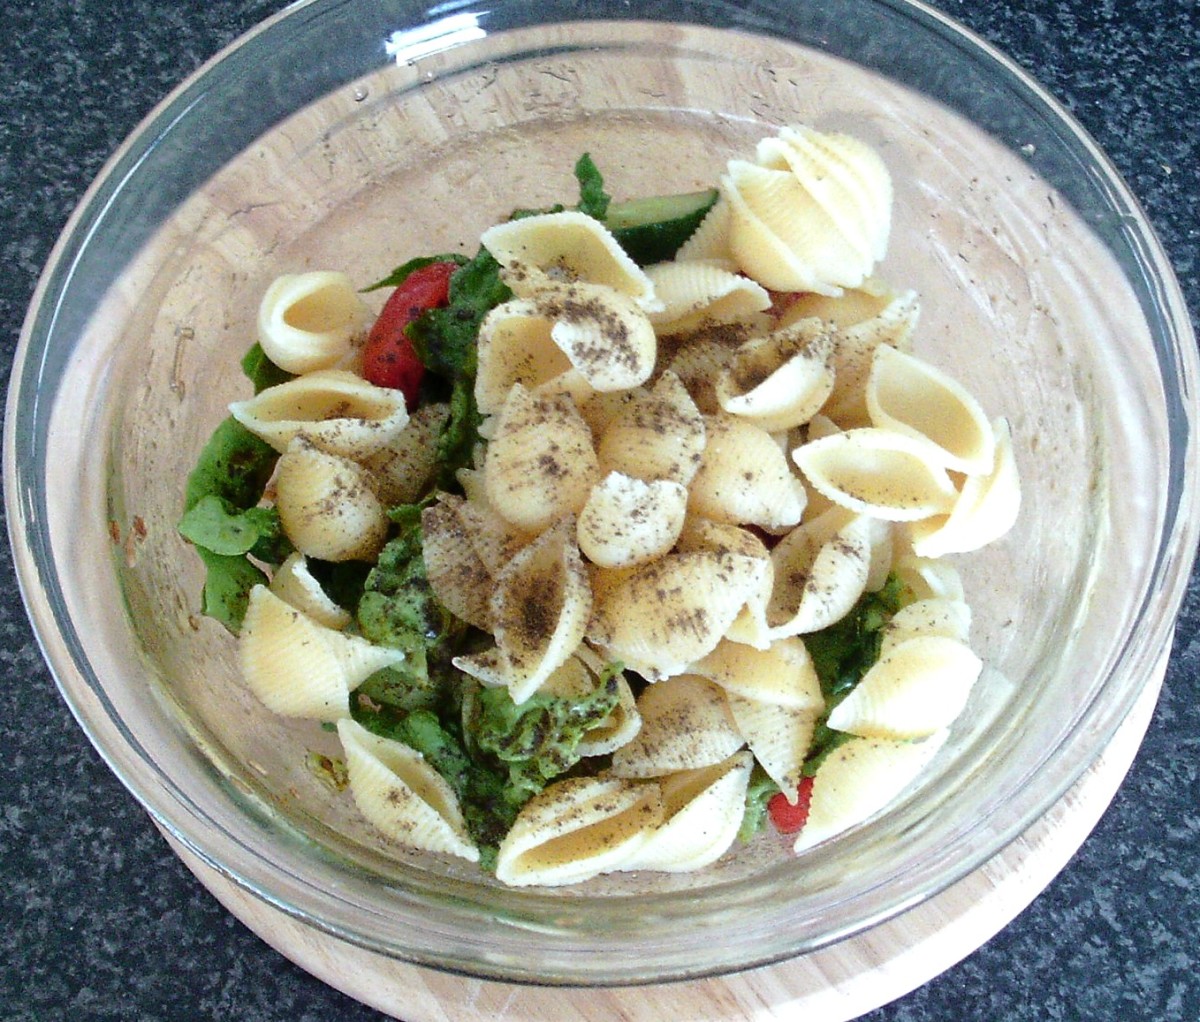 Add the cooled conchiglie pasta to the salad.